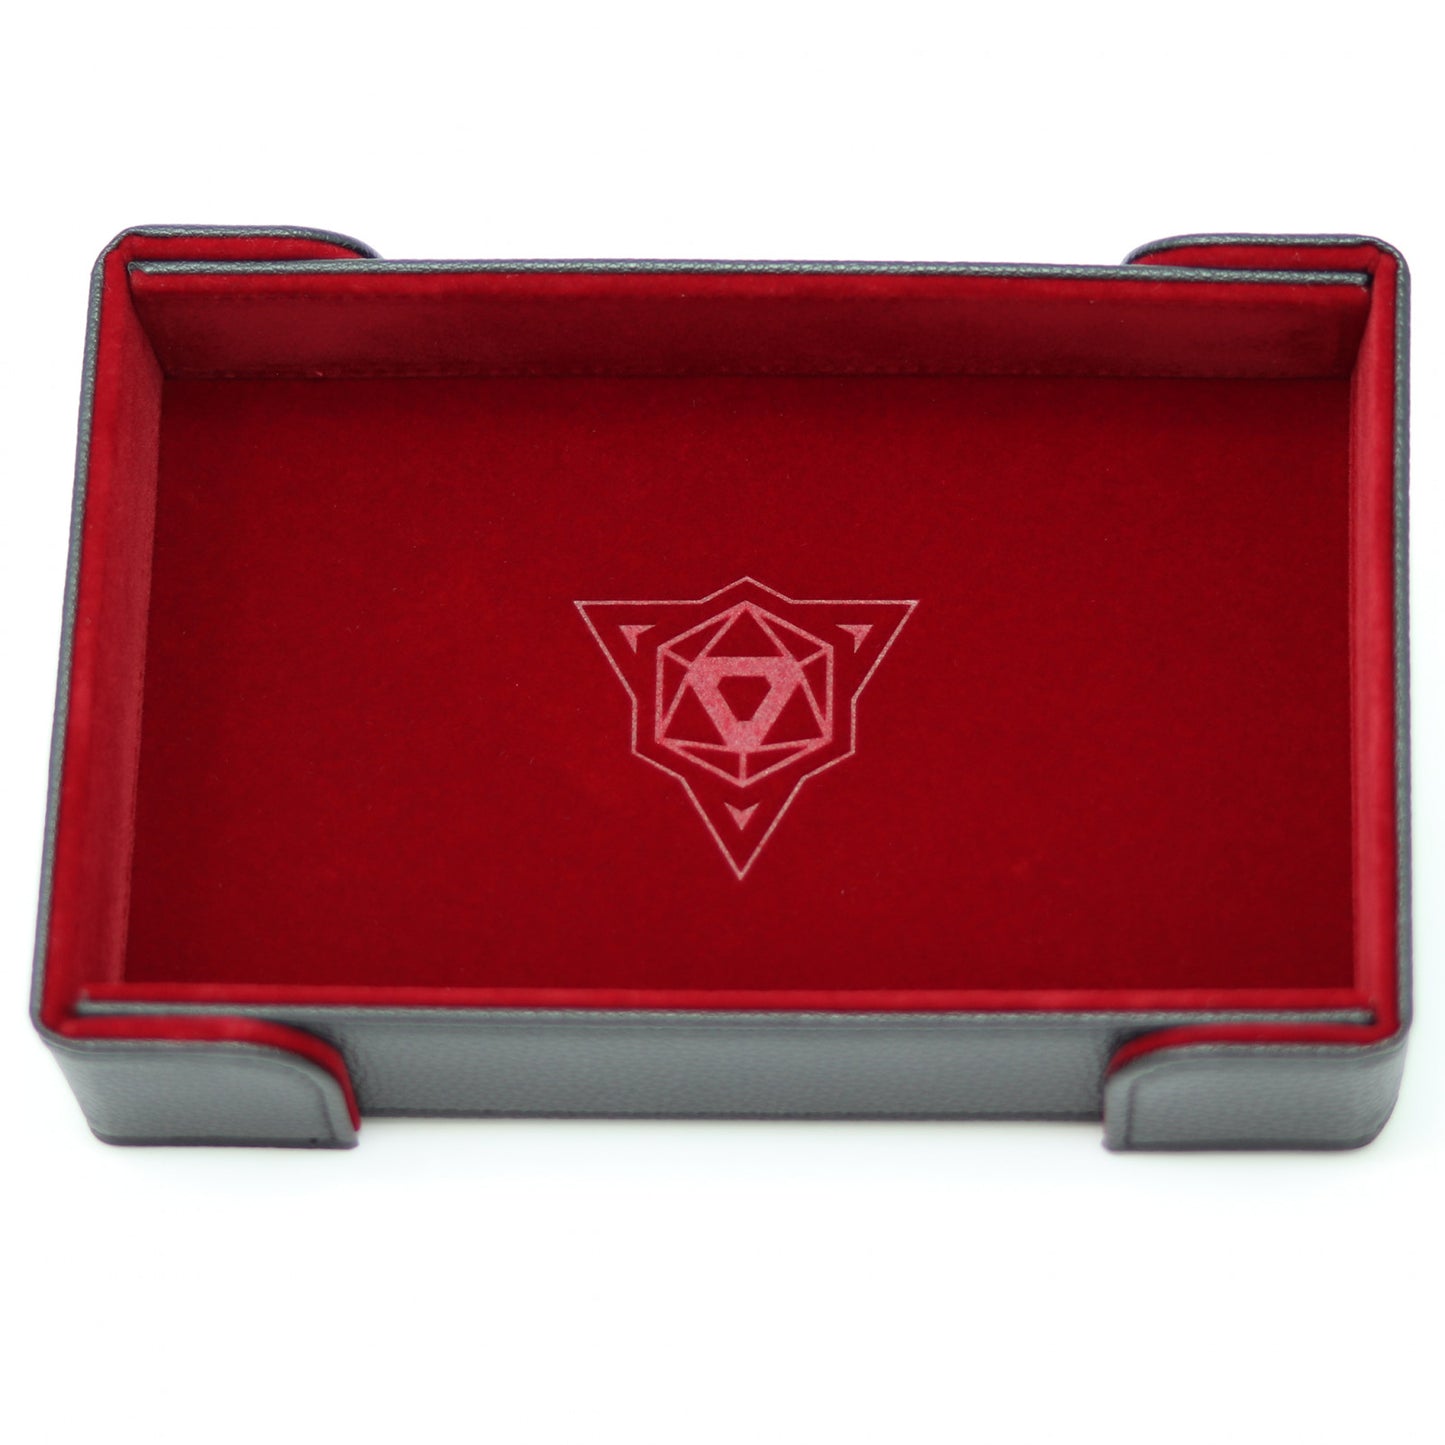 Die Hard Dice Folding Rectangle Tray - Red Velvet Dice Tray Lets Play Games   